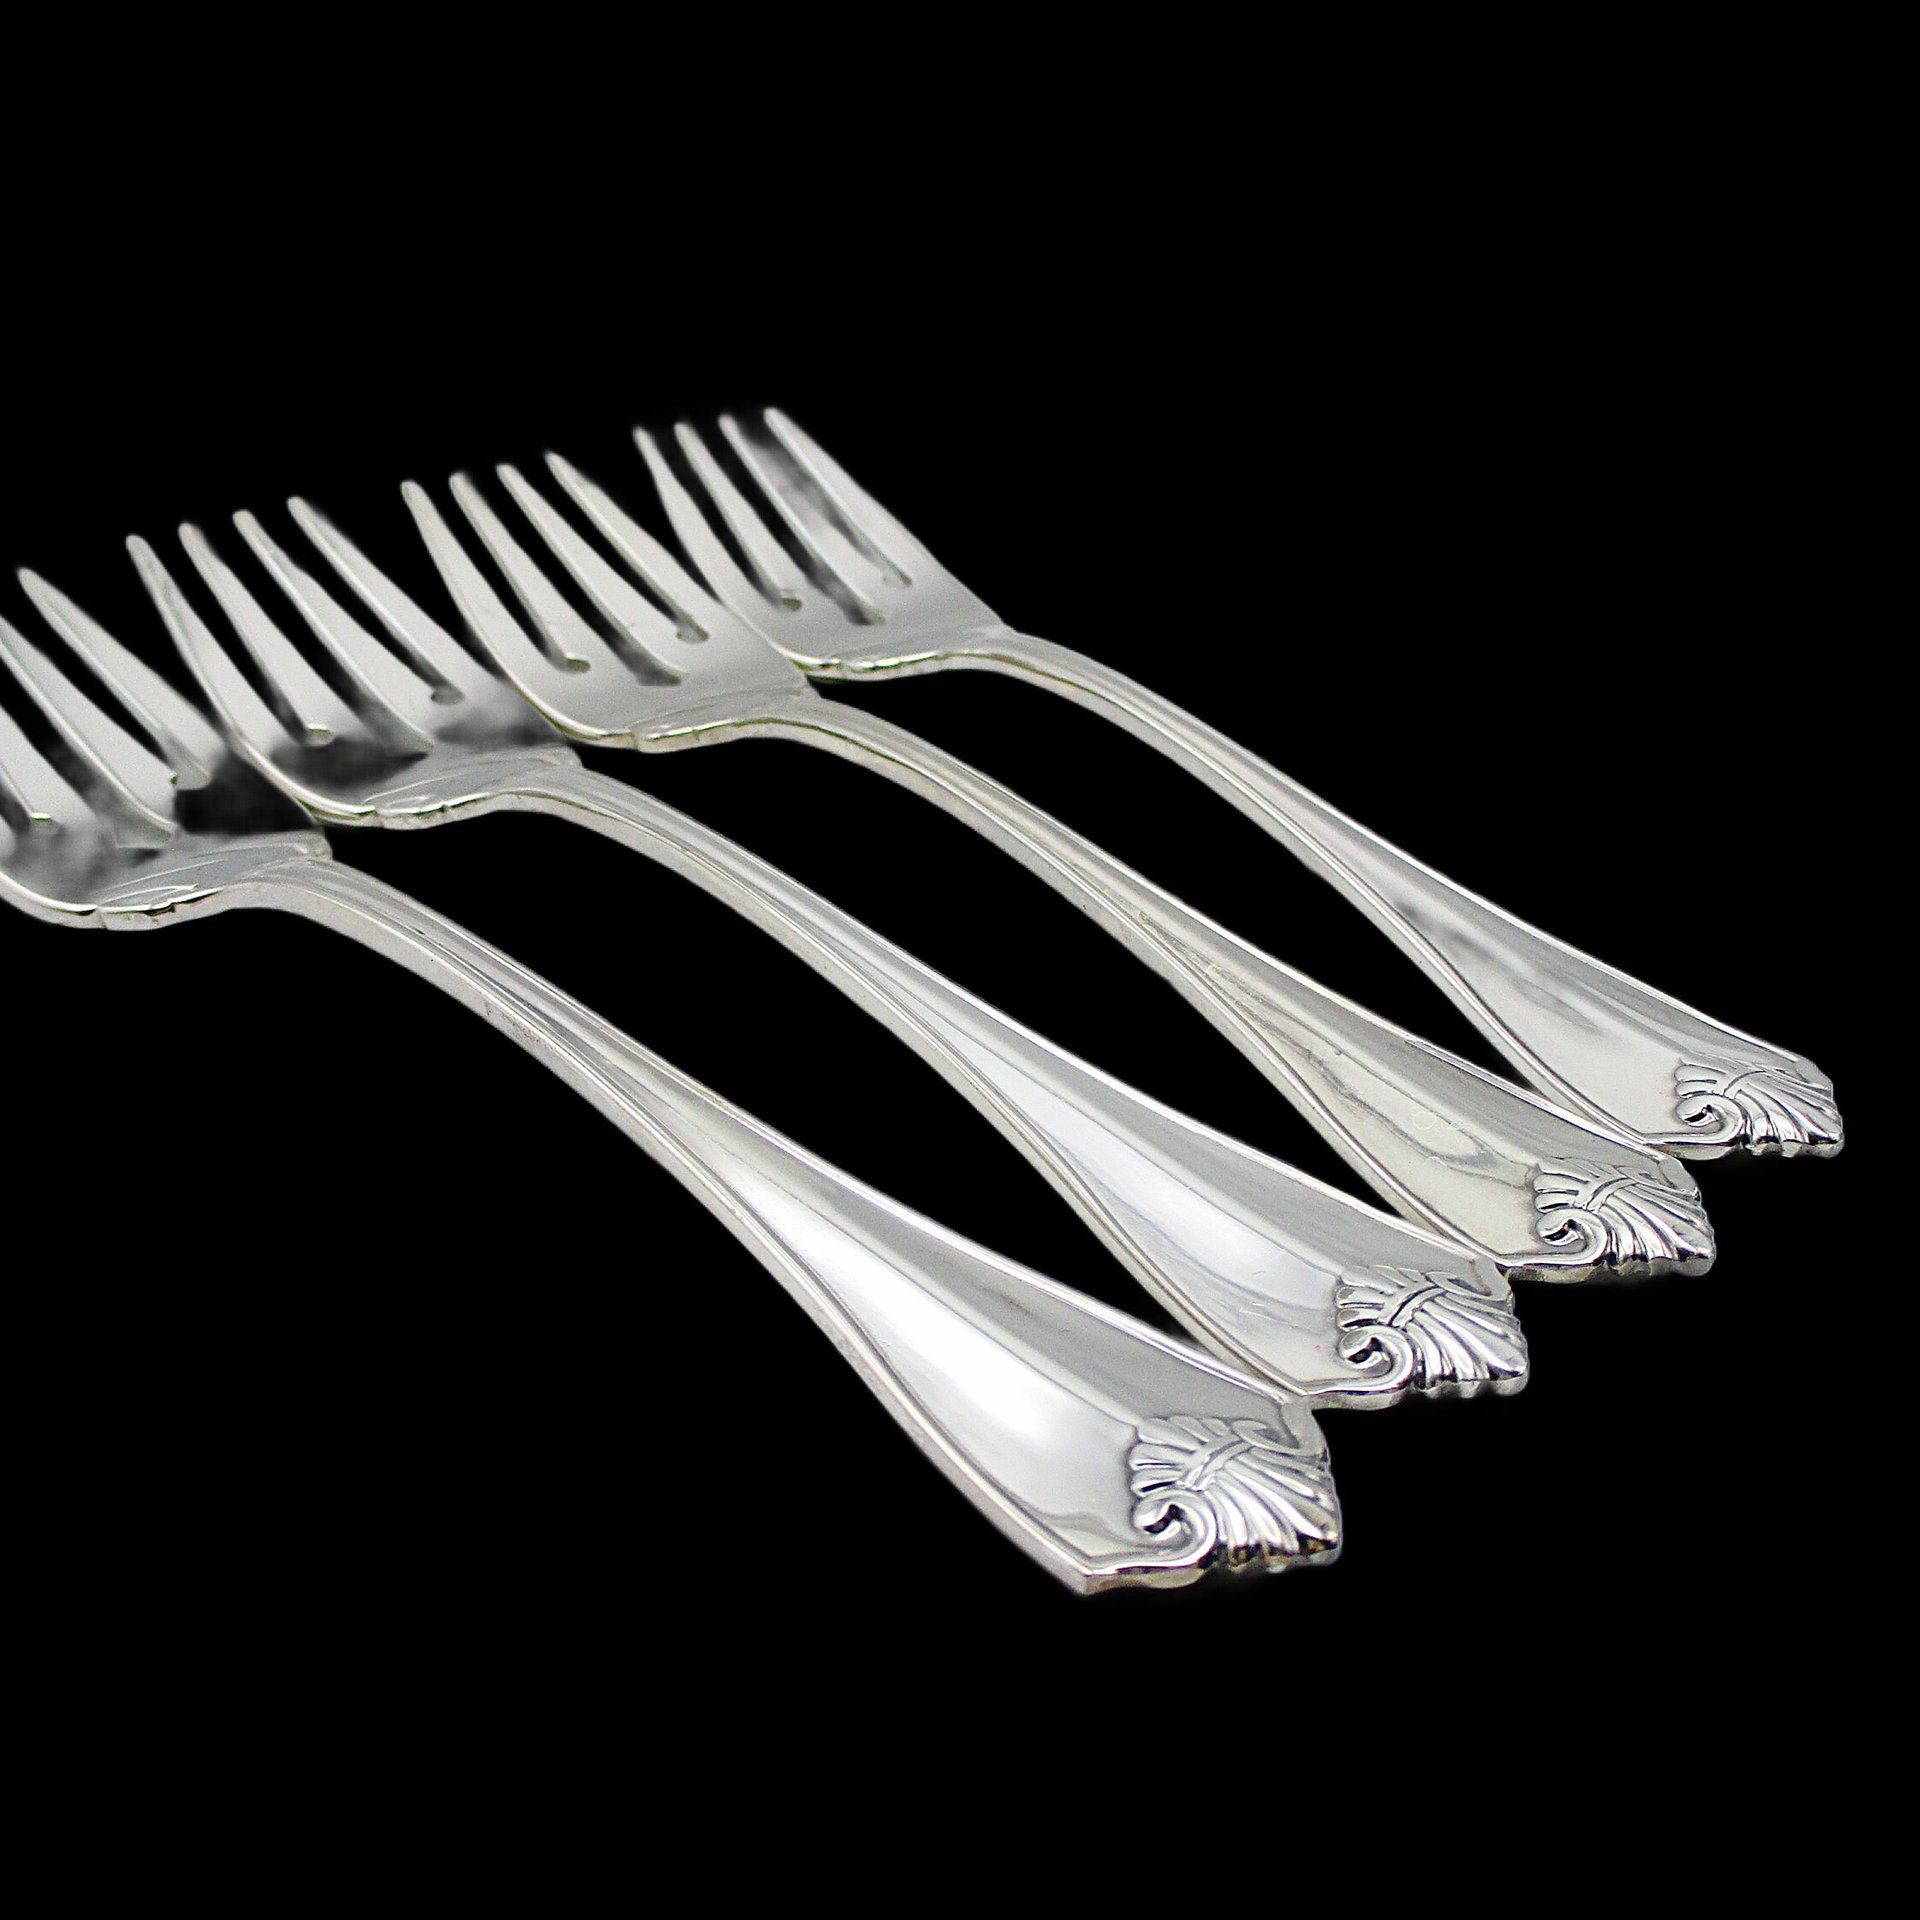 King James Silver Plate 4 Salad Forks, Oneida, Silverware Flatware Replacement Pieces, Excellent Condition